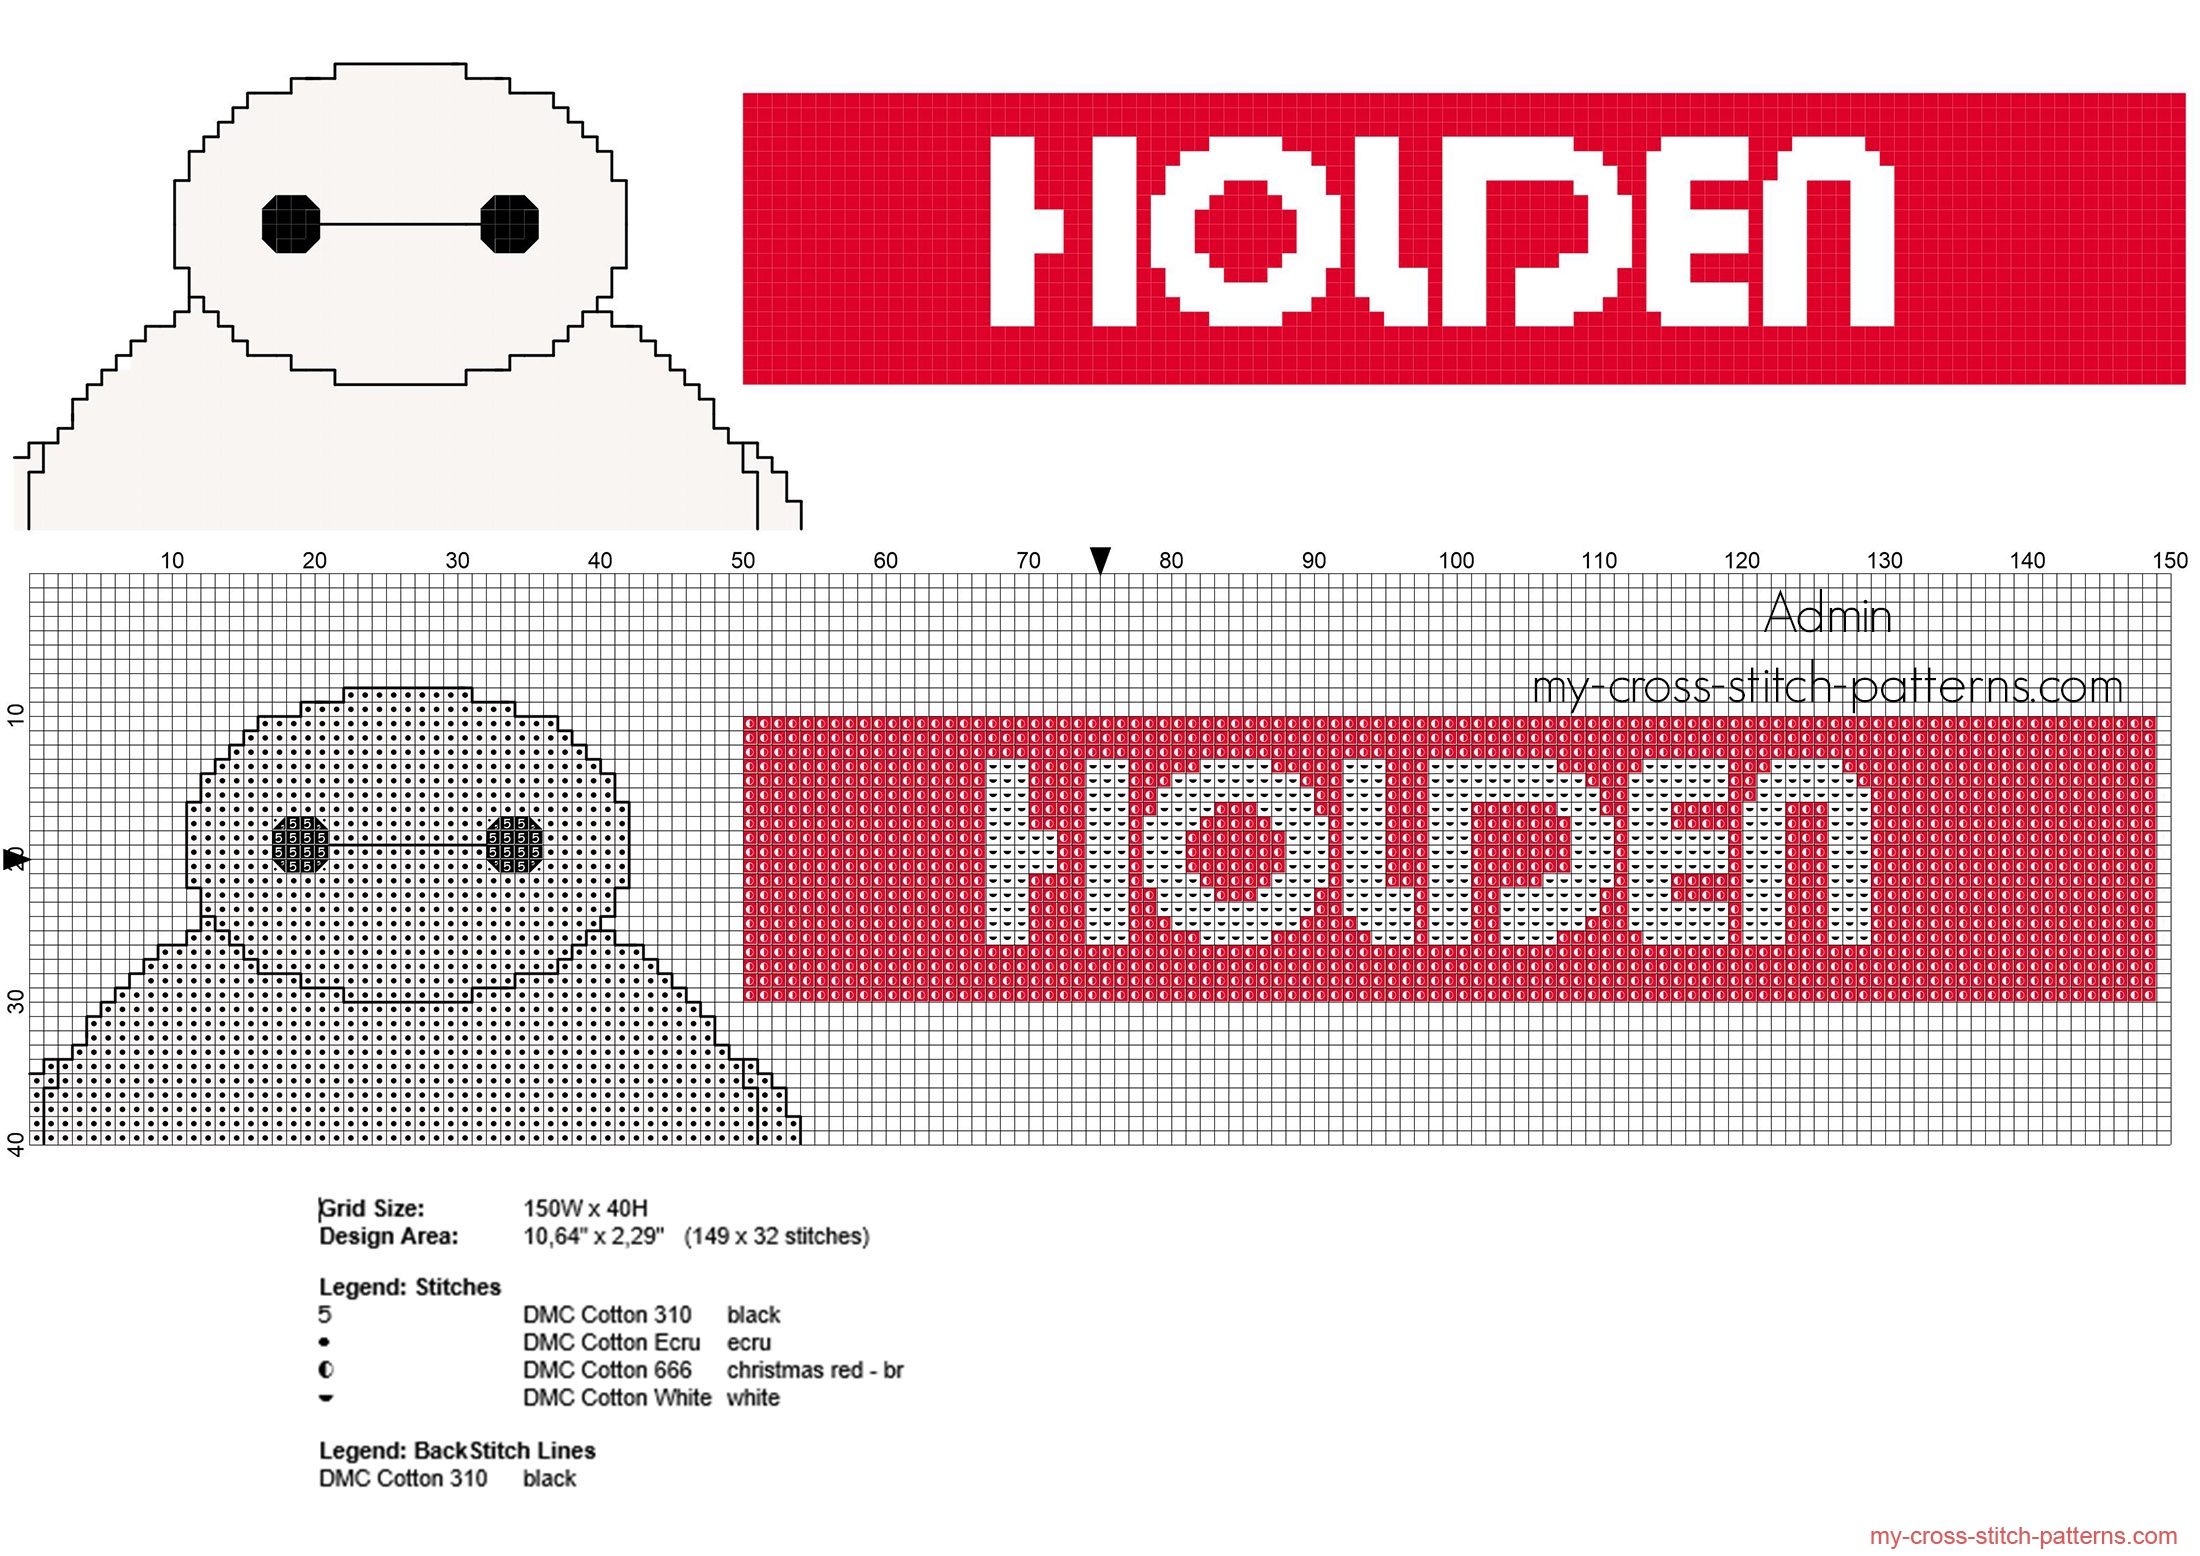 holden_cross_stitch_baby_male_name_with_baymax_from_disney_big_hero_6